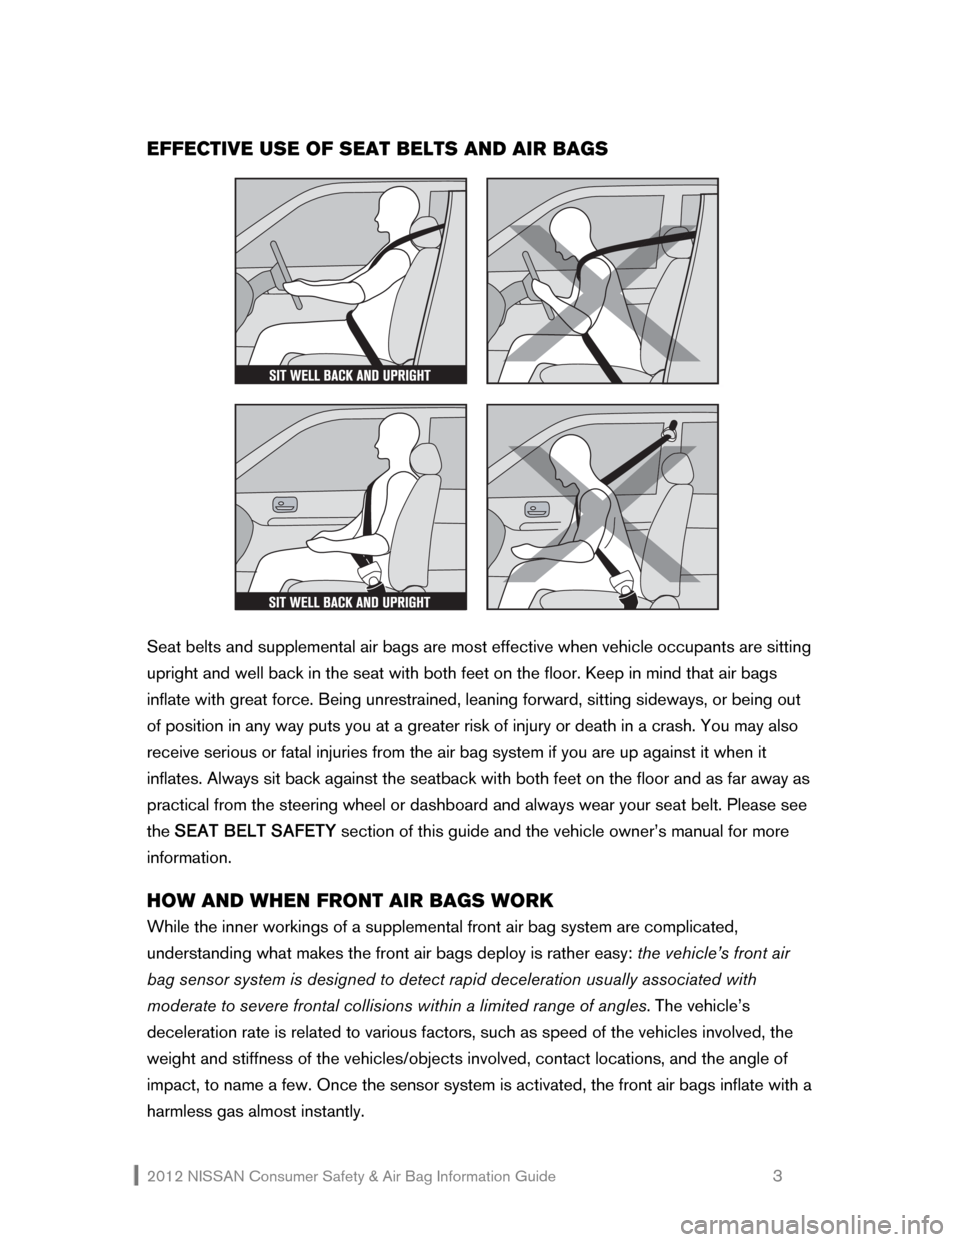 NISSAN 370Z ROADSTER 2012 Z34 Consumer Safety Air Bag Information Guide 2012 NISSAN Consumer Safety & Air Bag Information Guide                                                   3 
EFFECTIVE USE OF SEAT BELTS AND AIR BAGS 
 
 
 
Seat belts and supplemental air bags are mo